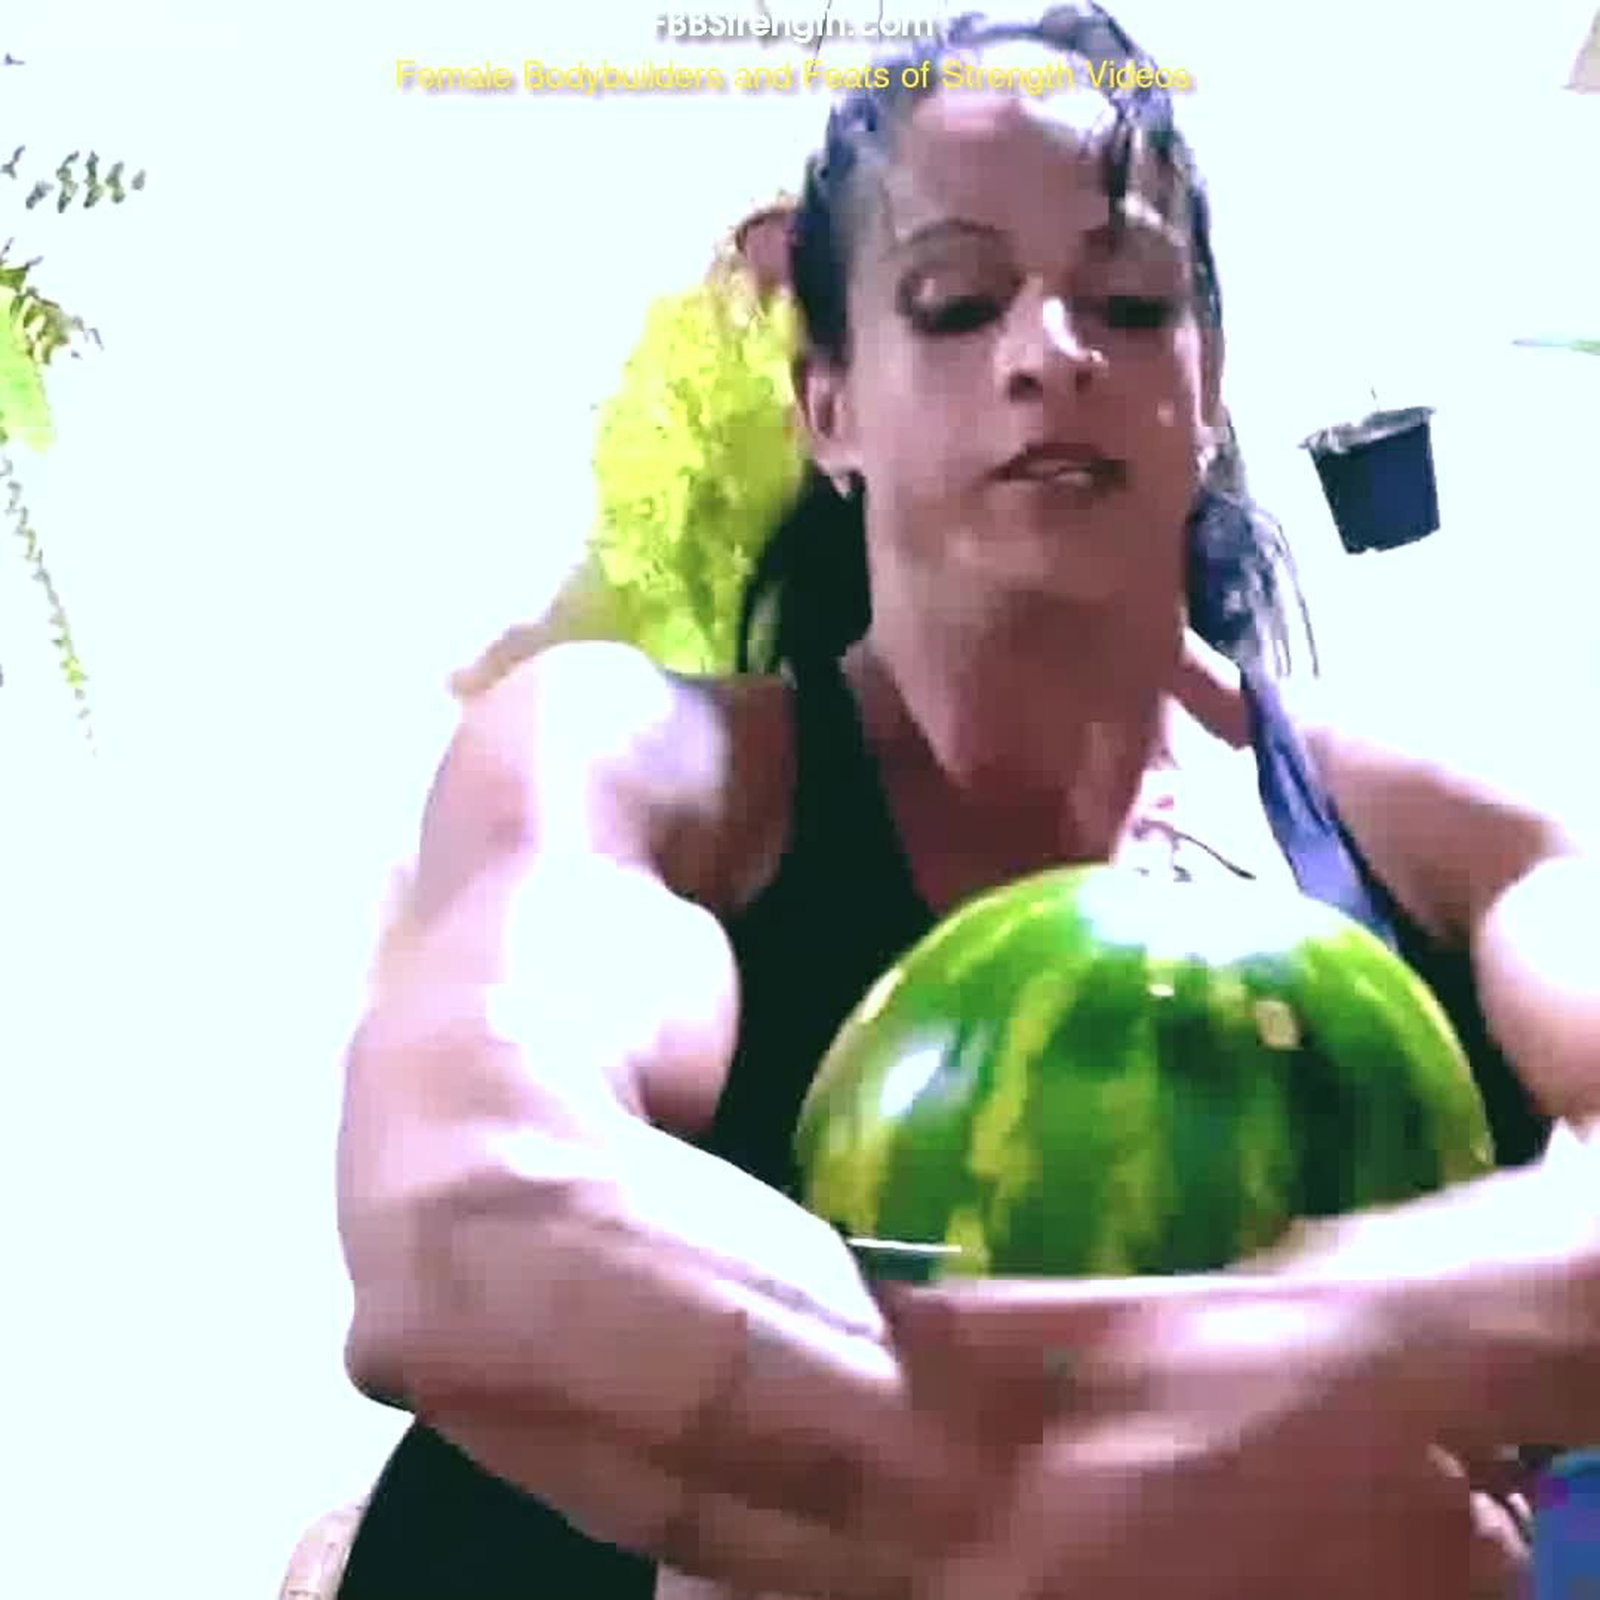 Video by MusclegirlStrength with the username @MusclegirlStrength, who is a brand user,  March 30, 2024 at 11:17 PM and the text says 'Muscle Goddess Crushes Watermelons with Power!: fbbstrength.com

#musclegirl #musclegirllove #femalemuscle #femalemuscles #featsofstrength #MuscleCrush #FlexFruit #FruitPowerhouse'